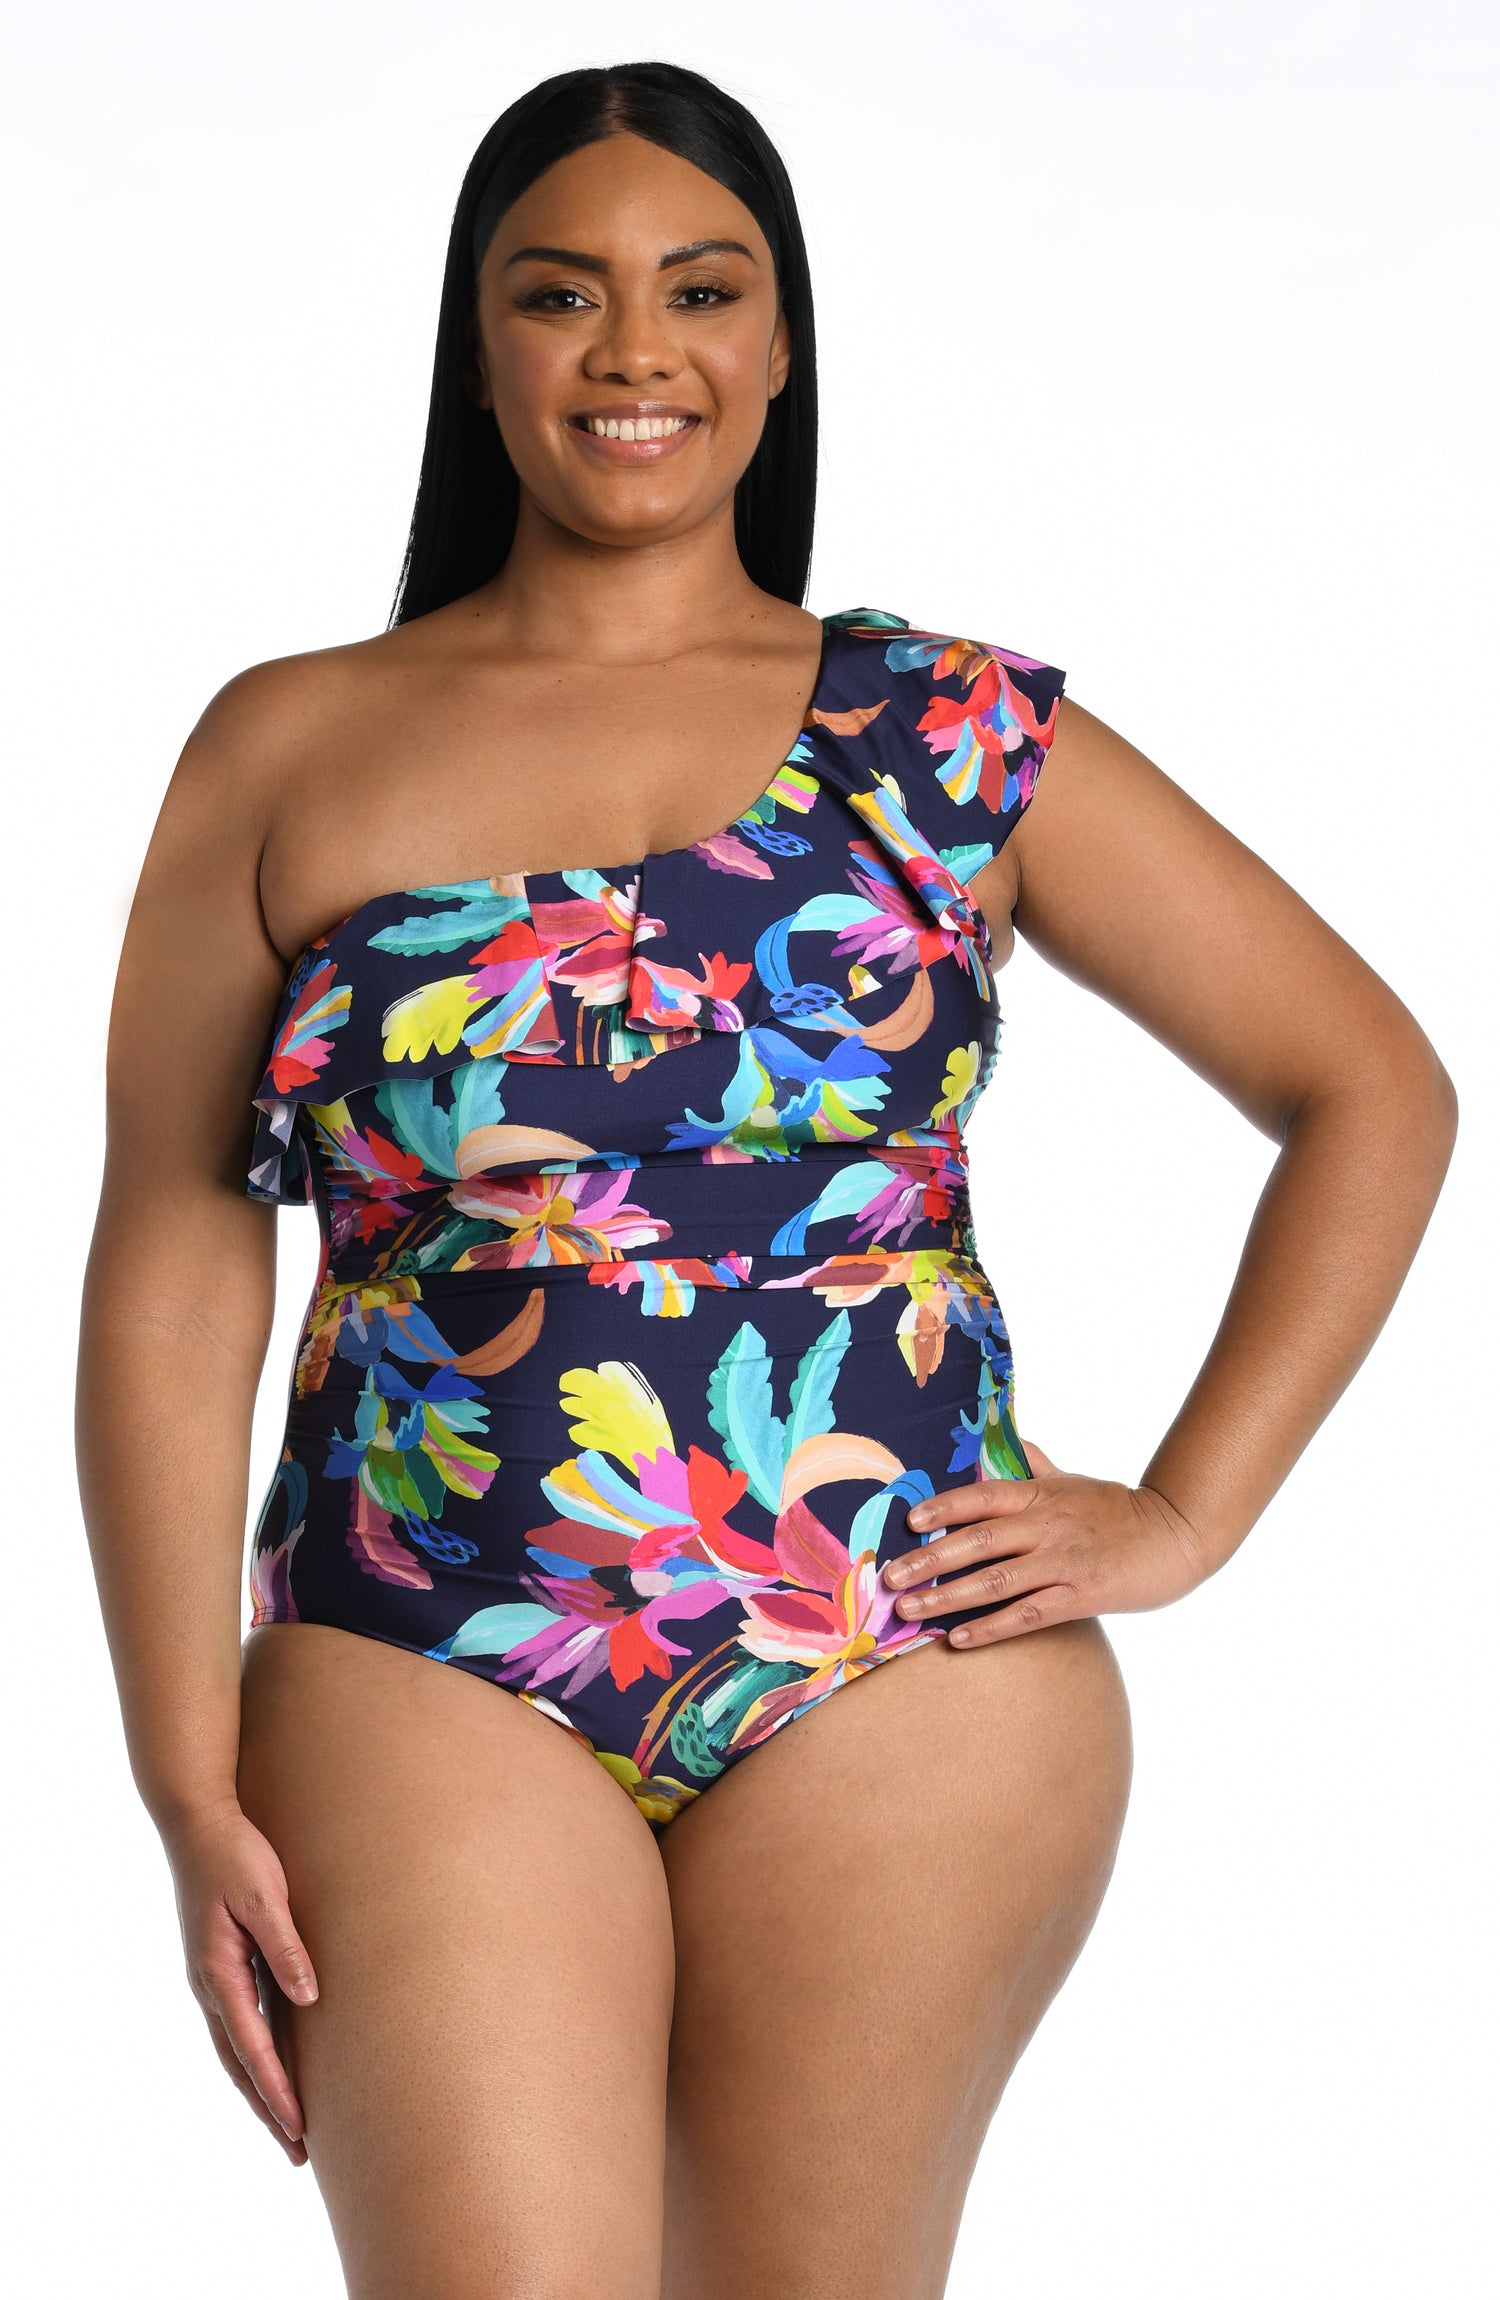 Model is wearing a multi-colored tropical printed one piece swimsuit from our By the Sea collection.